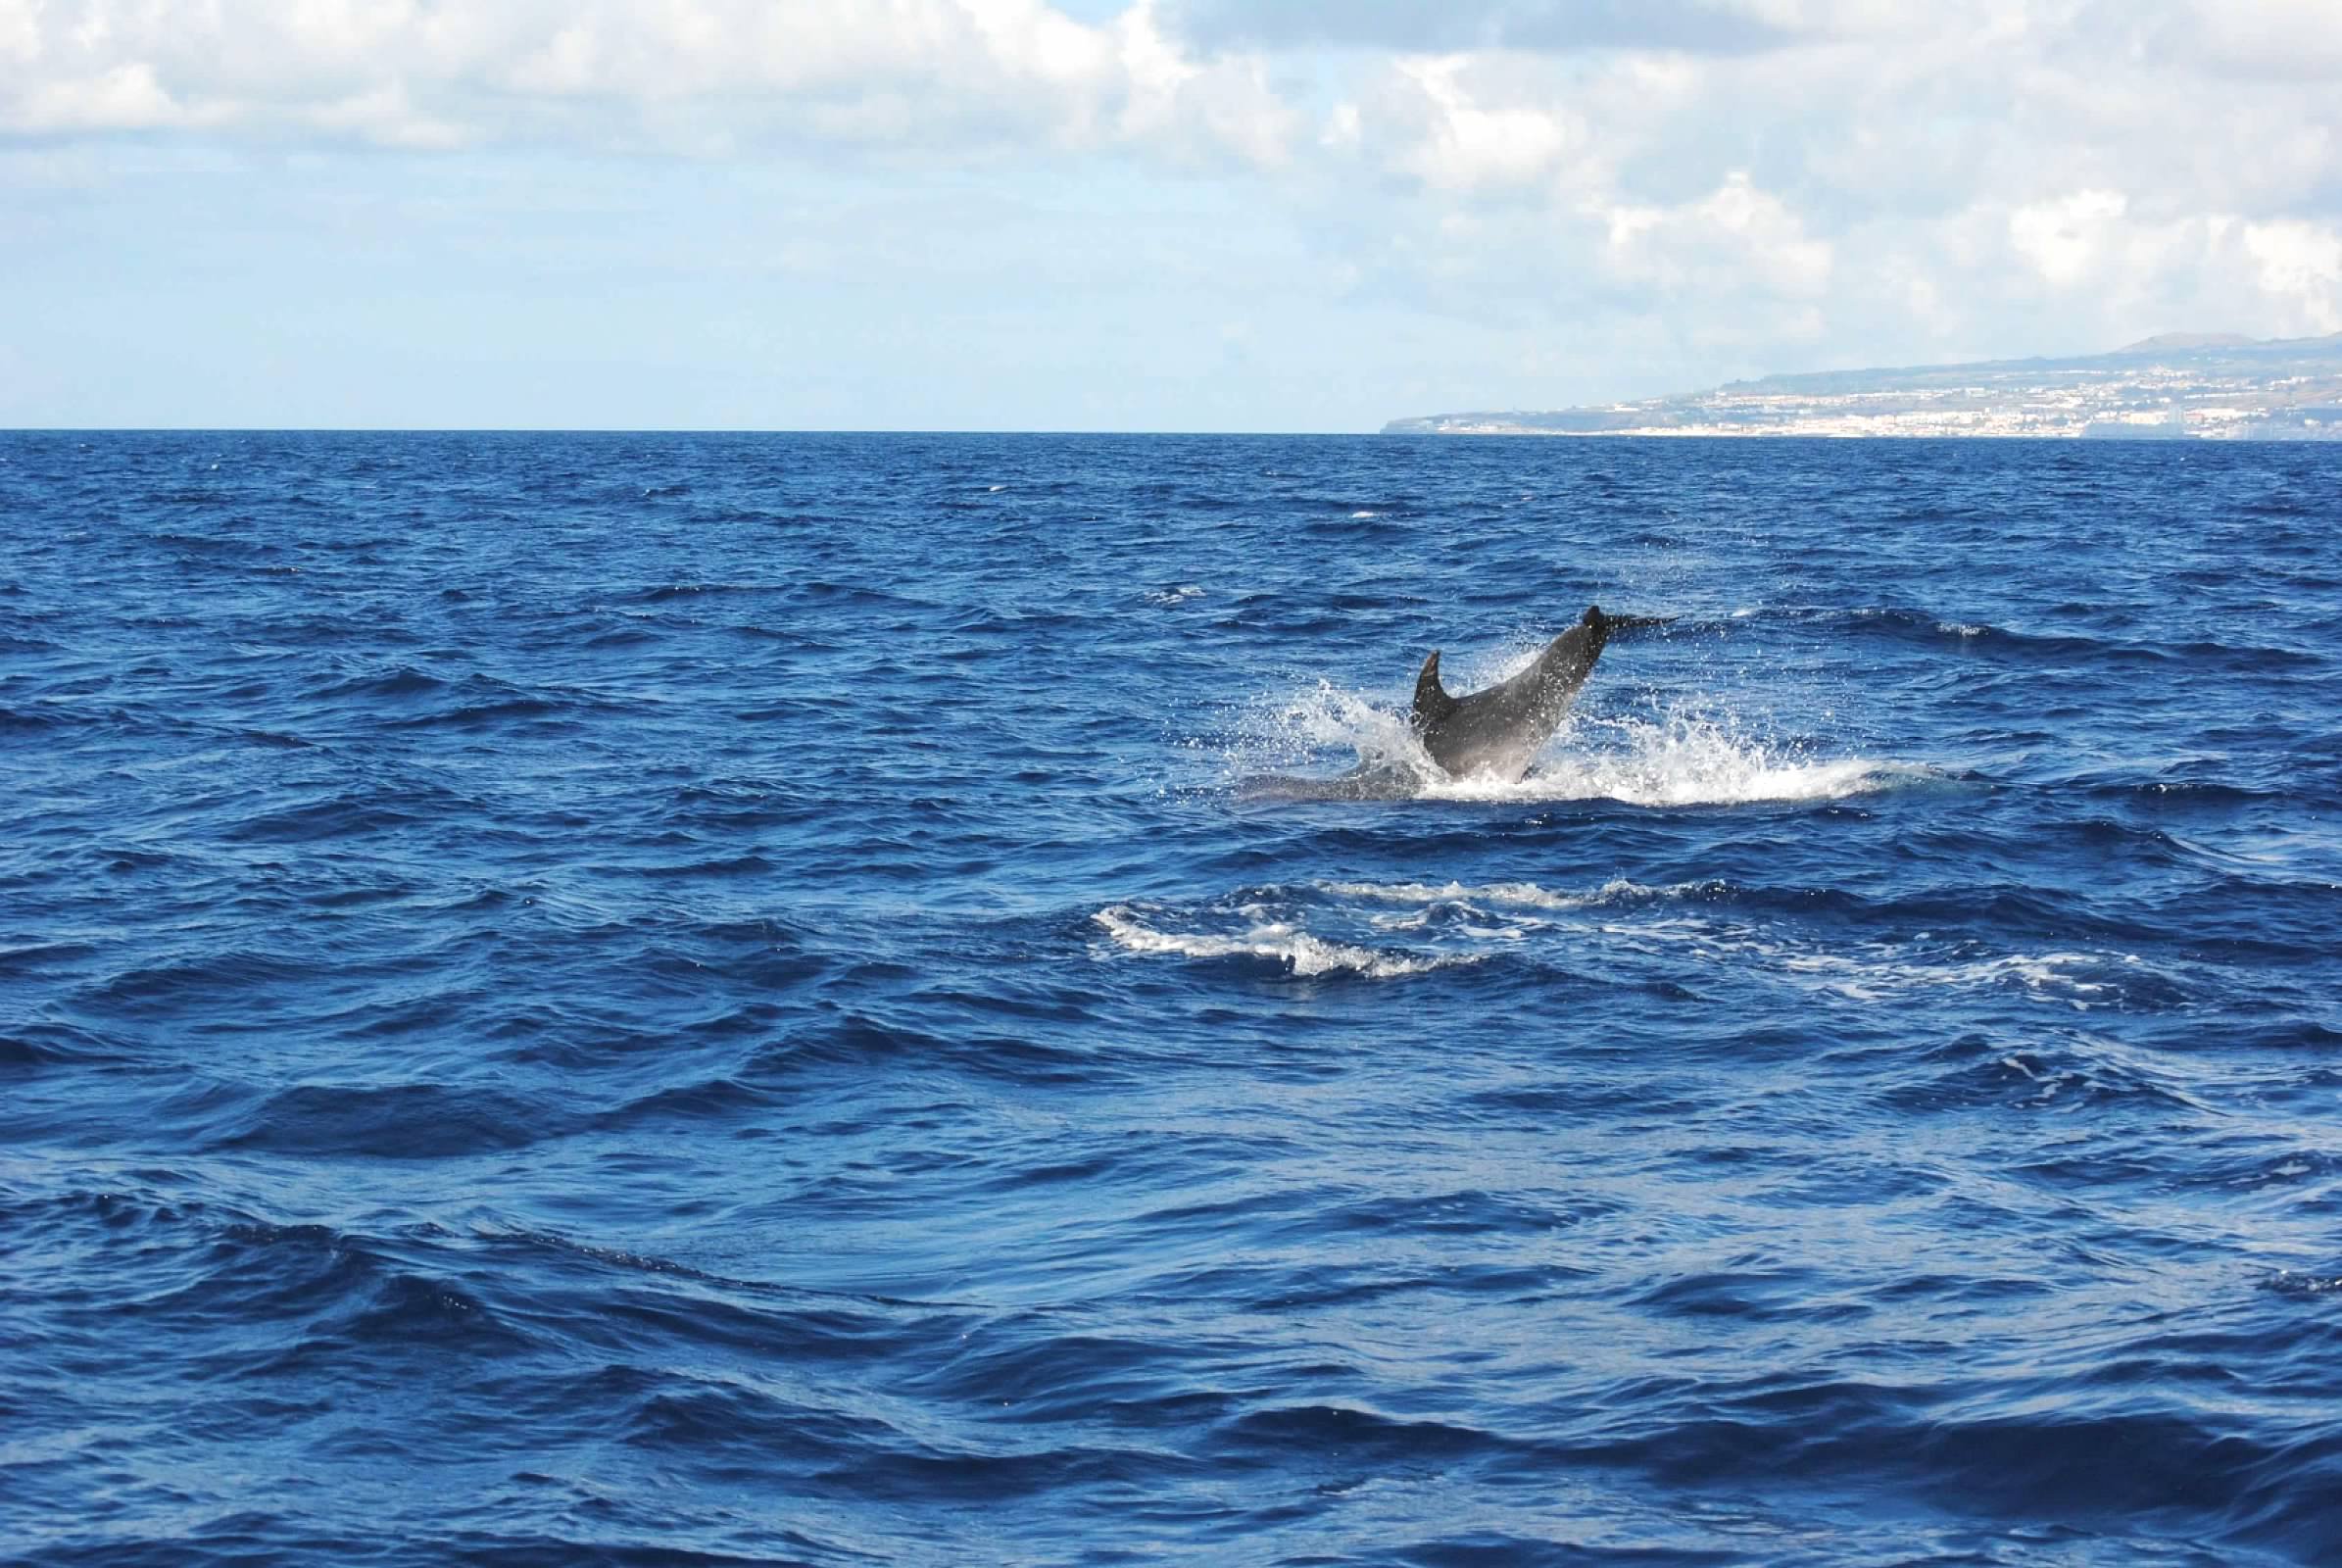 Spotting dolphins in the Azores